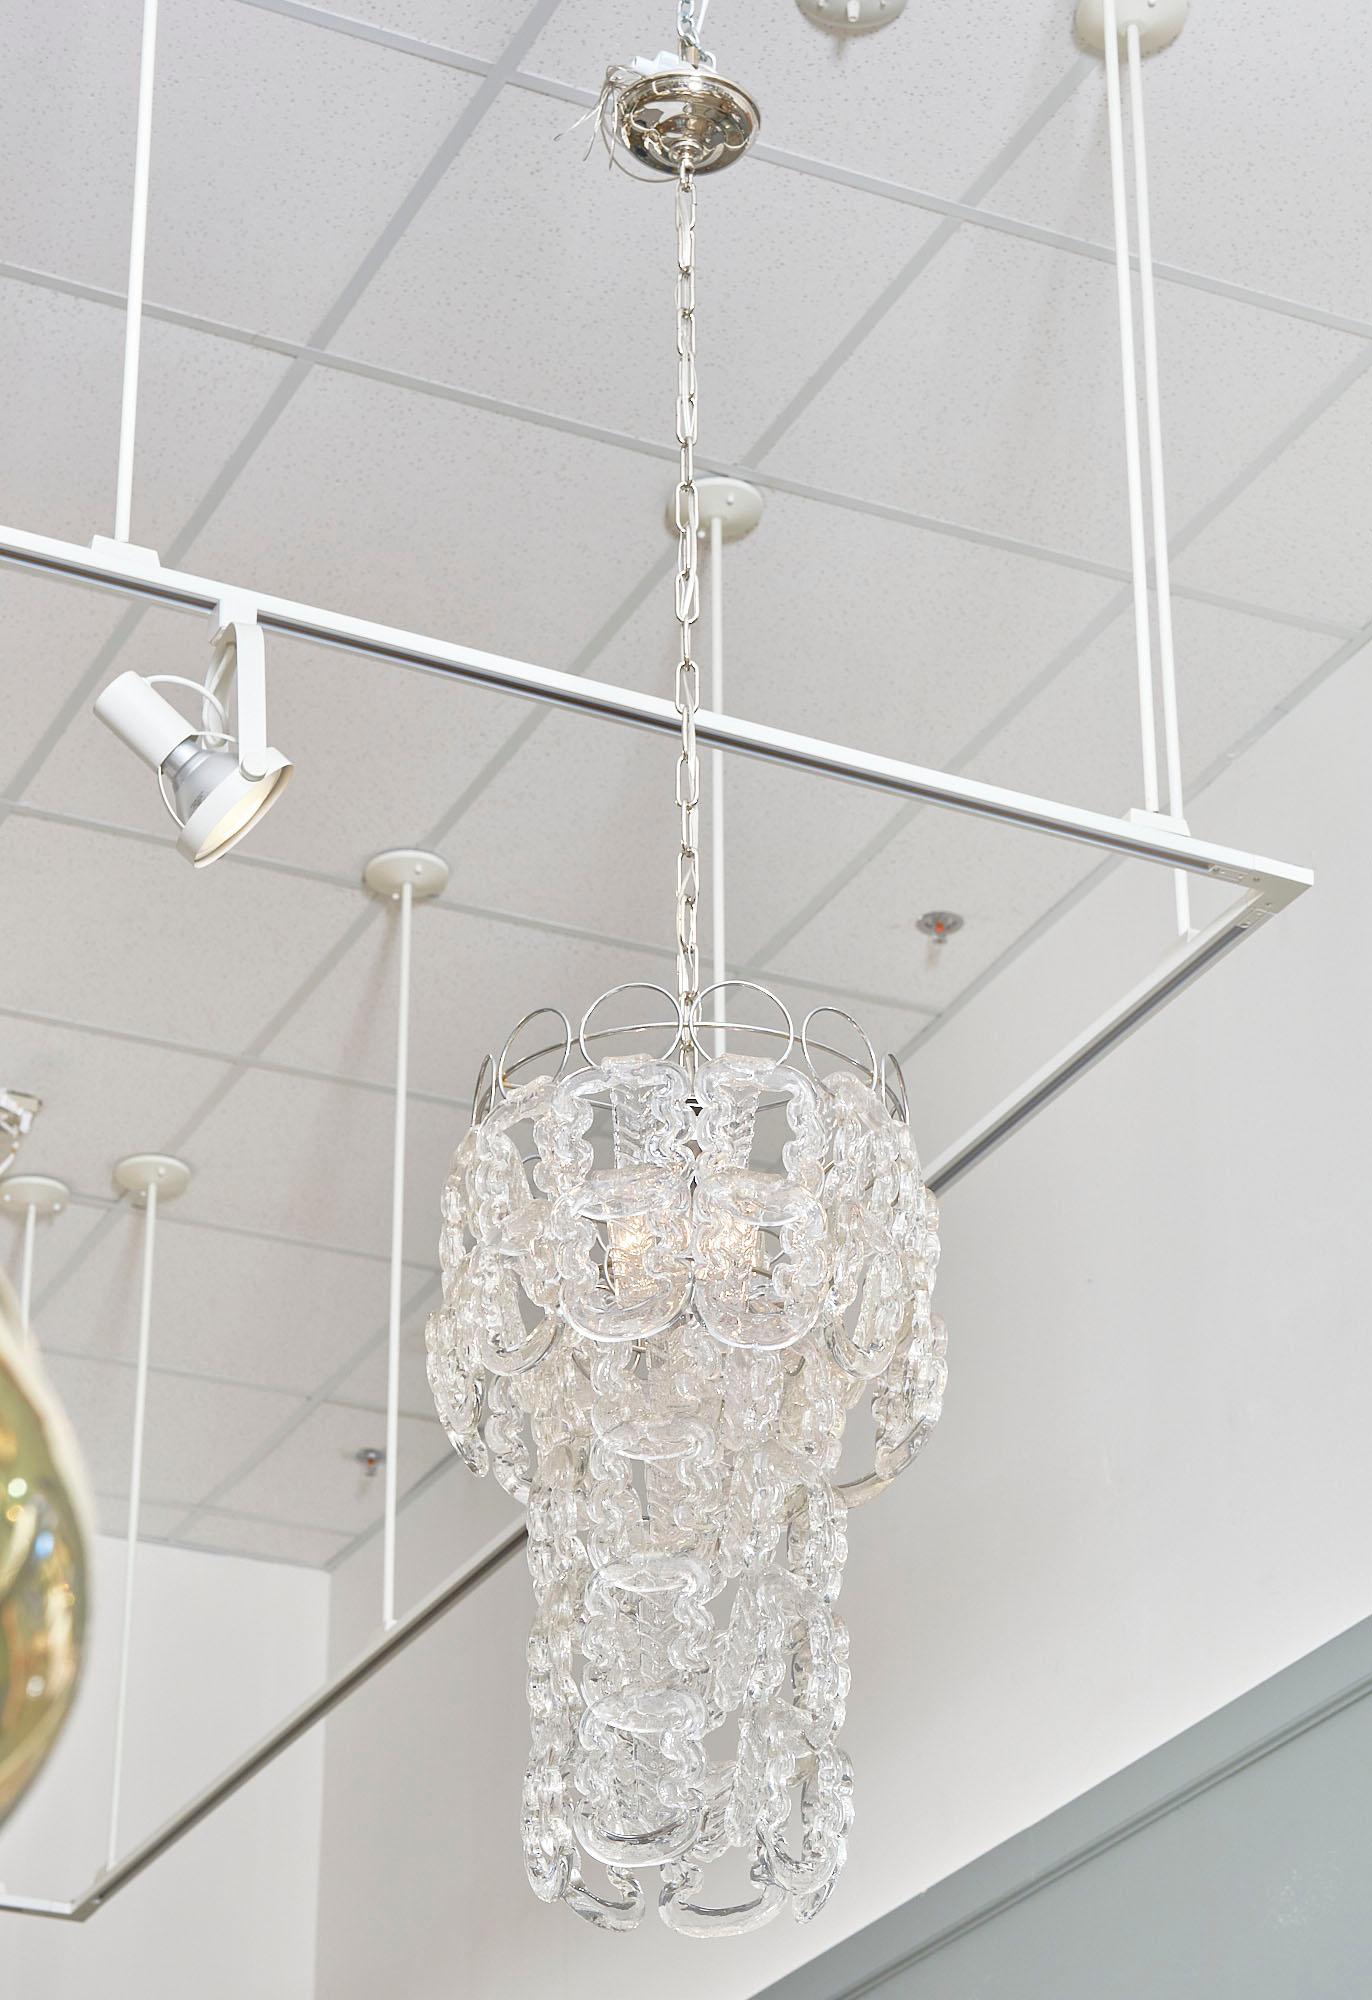 Chandelier; vintage; from Italy in the Modernist style. We love the multiple twist shaped “ganci” (hooks) hang from the original nickeled steel structure. It has been newly wired to fit US standards.

This piece currently has a height from ceiling